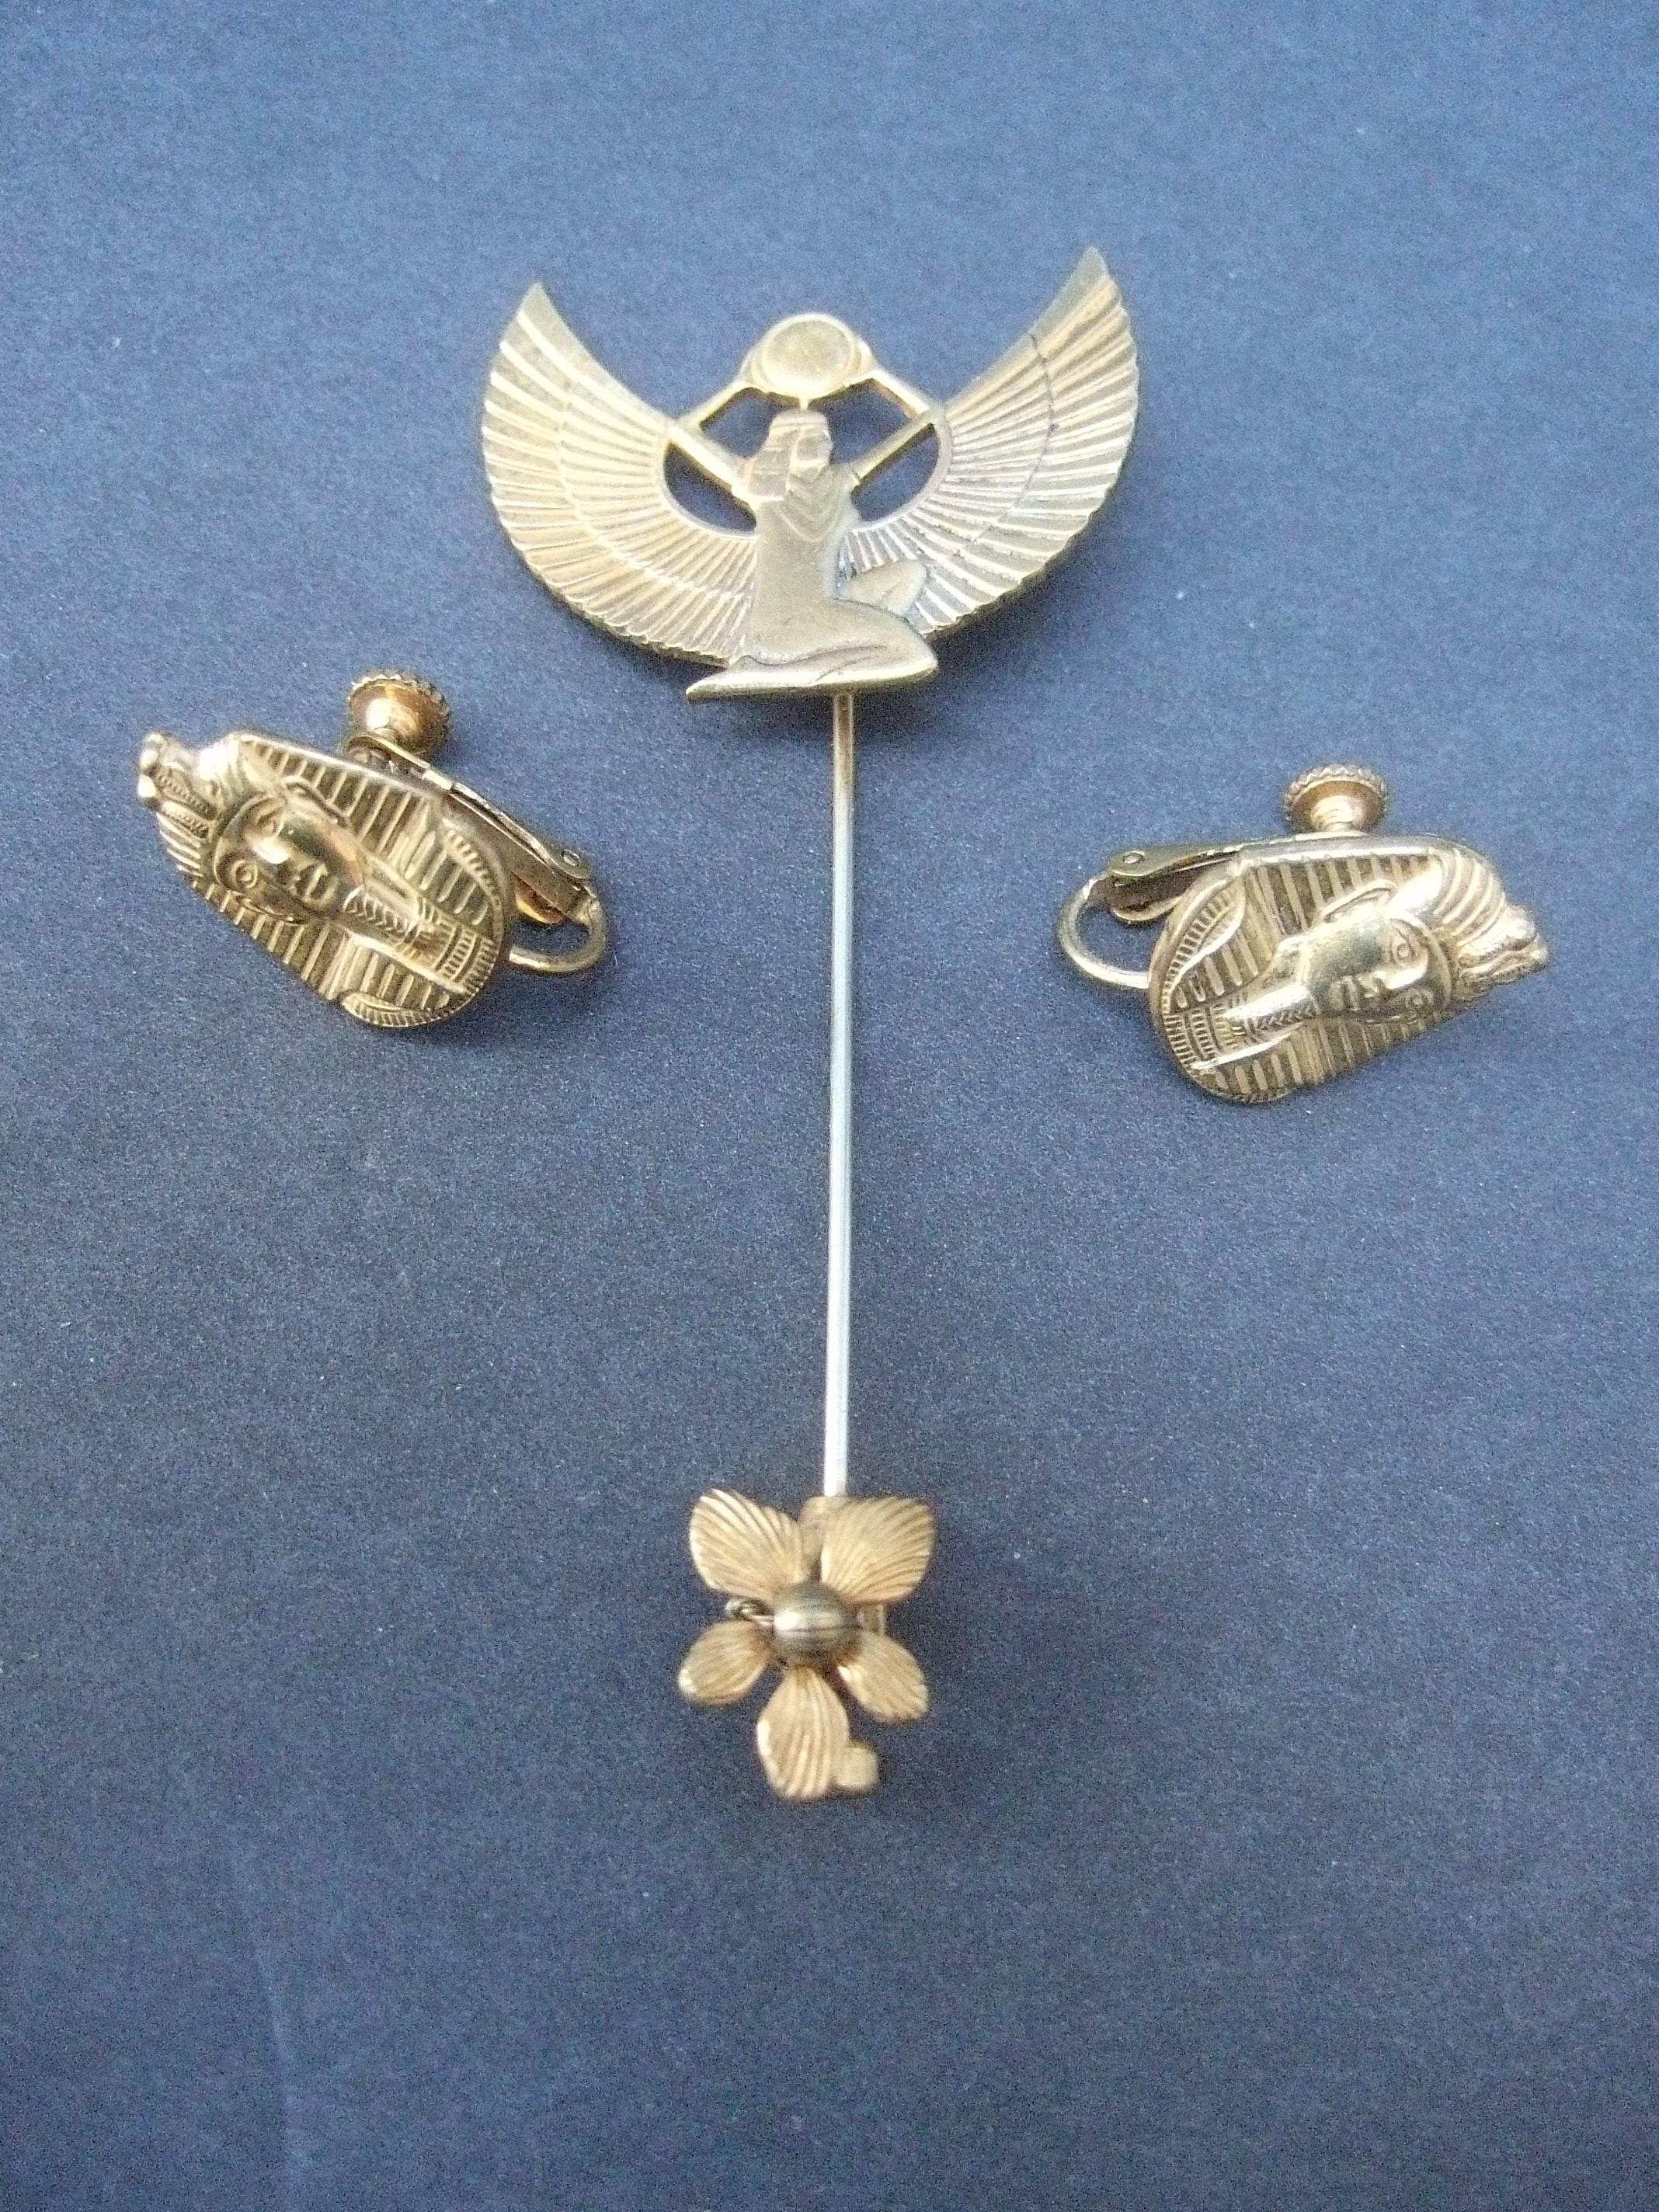 Miriam Haskell Egyptian revival stick pin & earrings ca 1970
The unique stick pin is designed with a stylized Egyptian
winged goddess

The earrings are adorned with Pharaoh mask 
Both the stick pin and earrings are designed 
with Haskell's